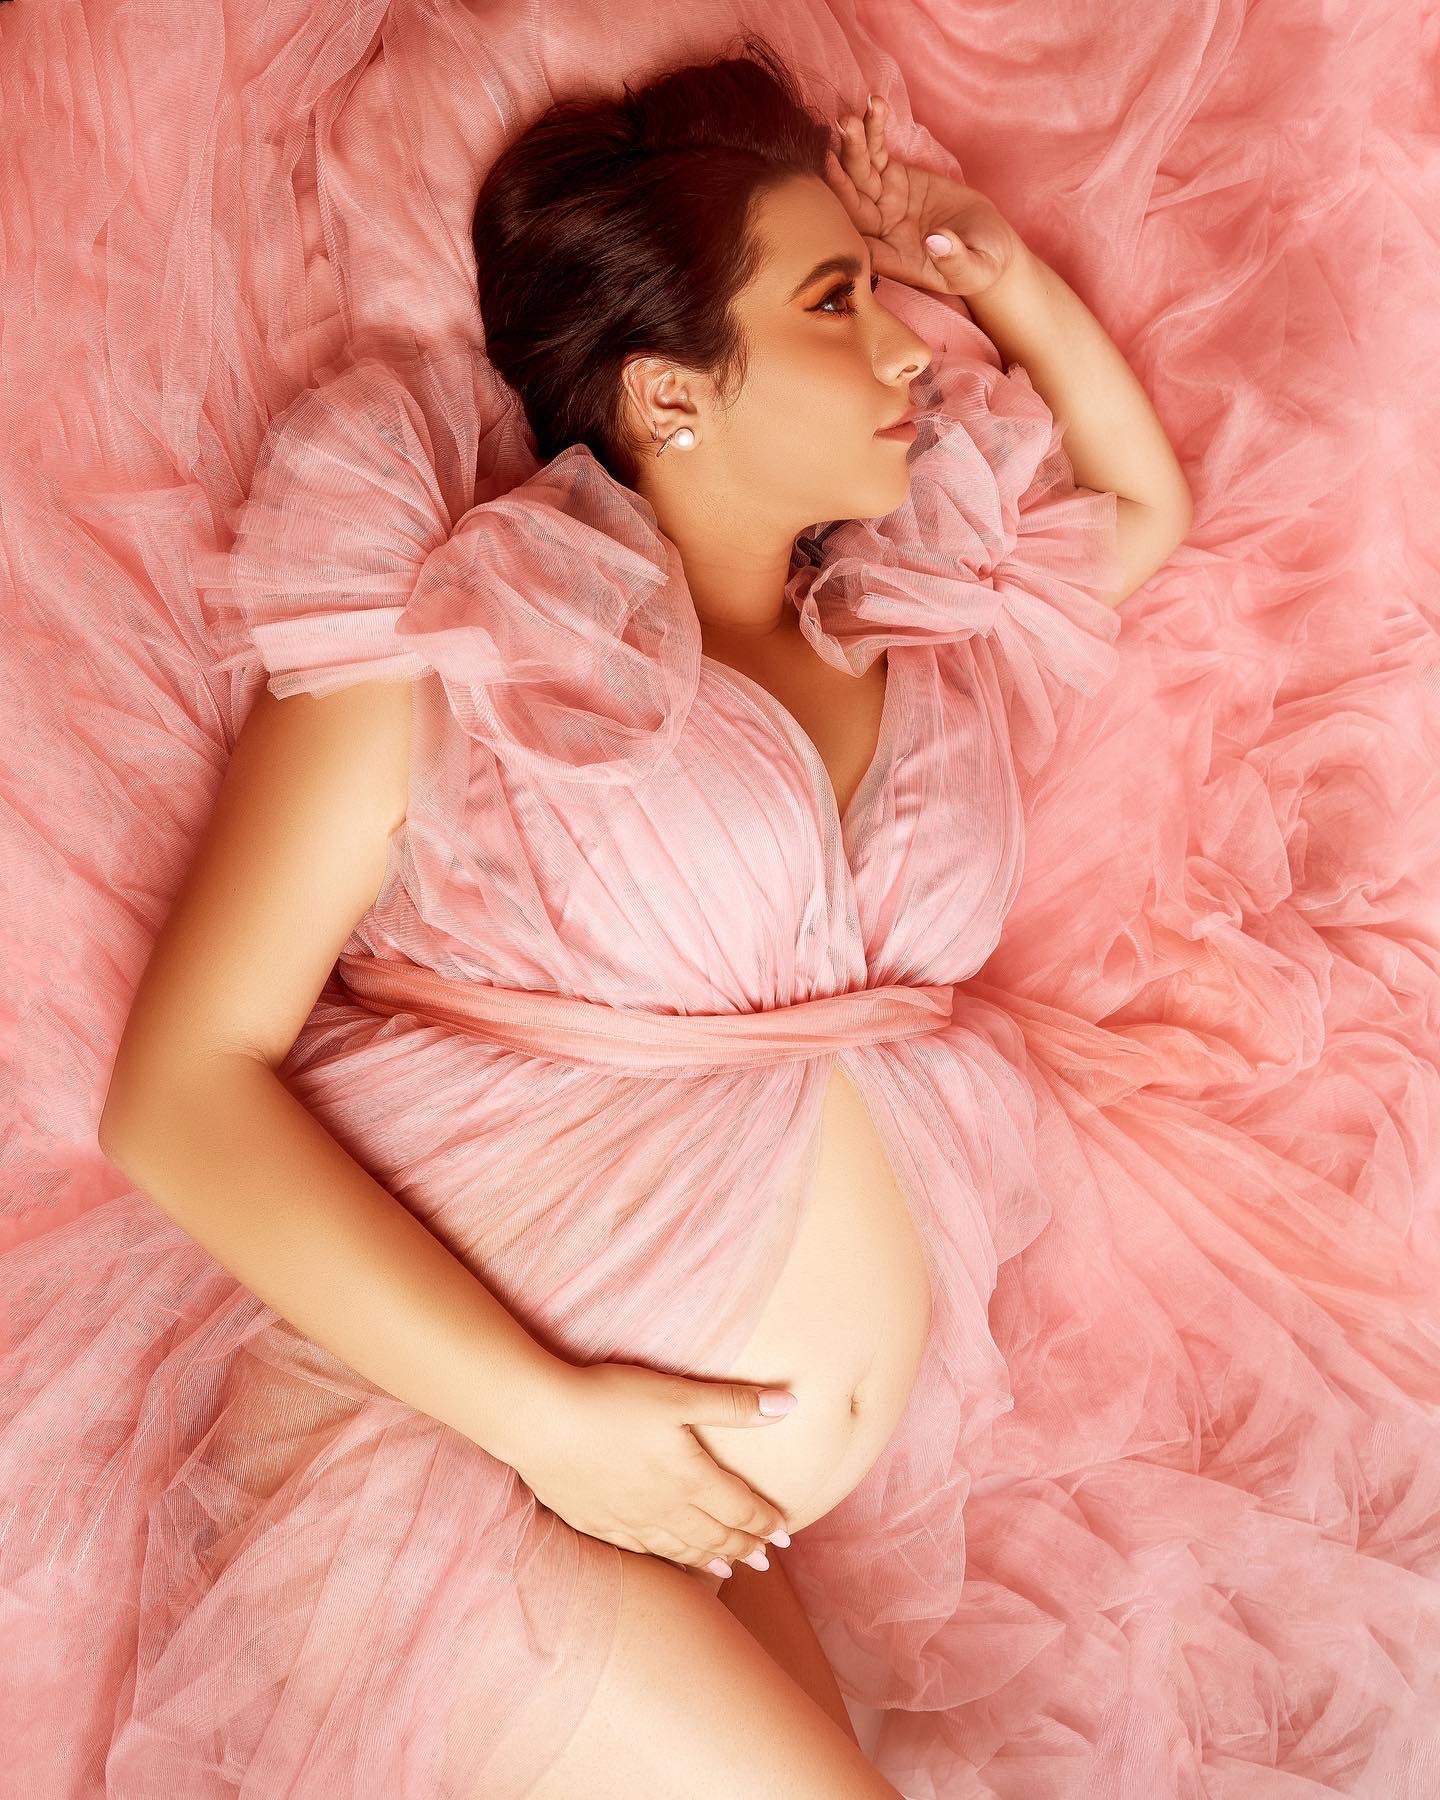 Maternity Photoshoot Dresses - Pink Tulle Gown - Lotus